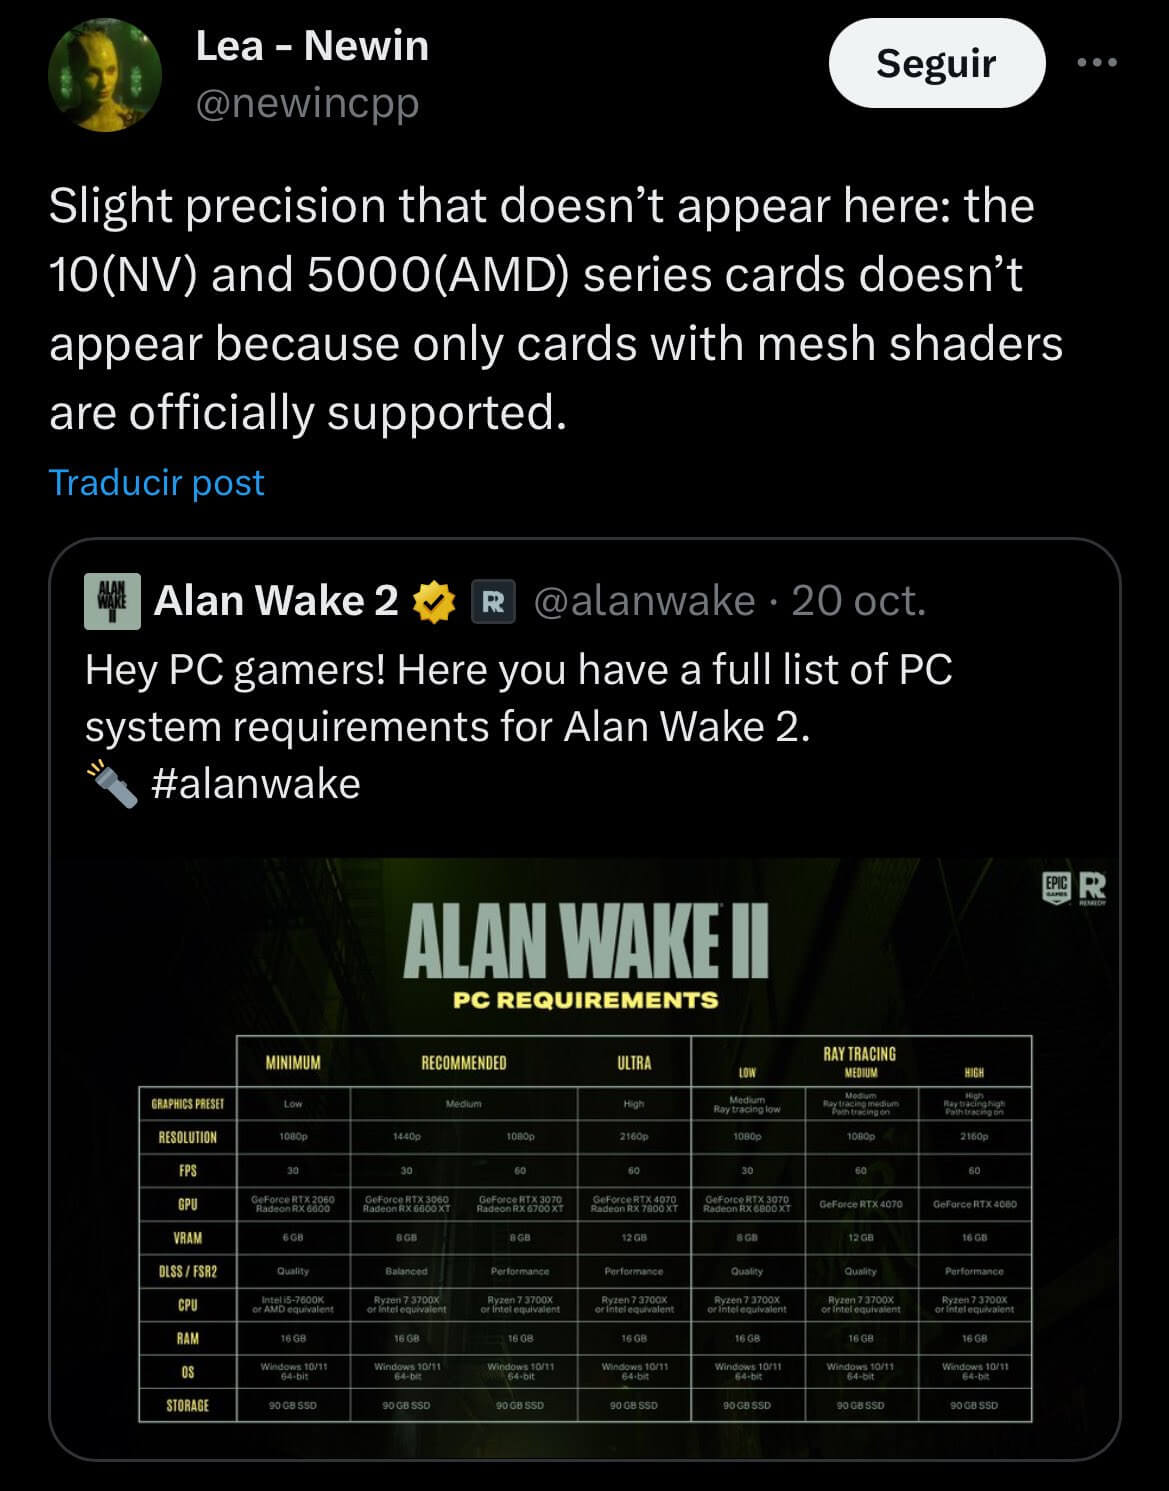 What Are The PC System Requirements For Alan Wake 2?